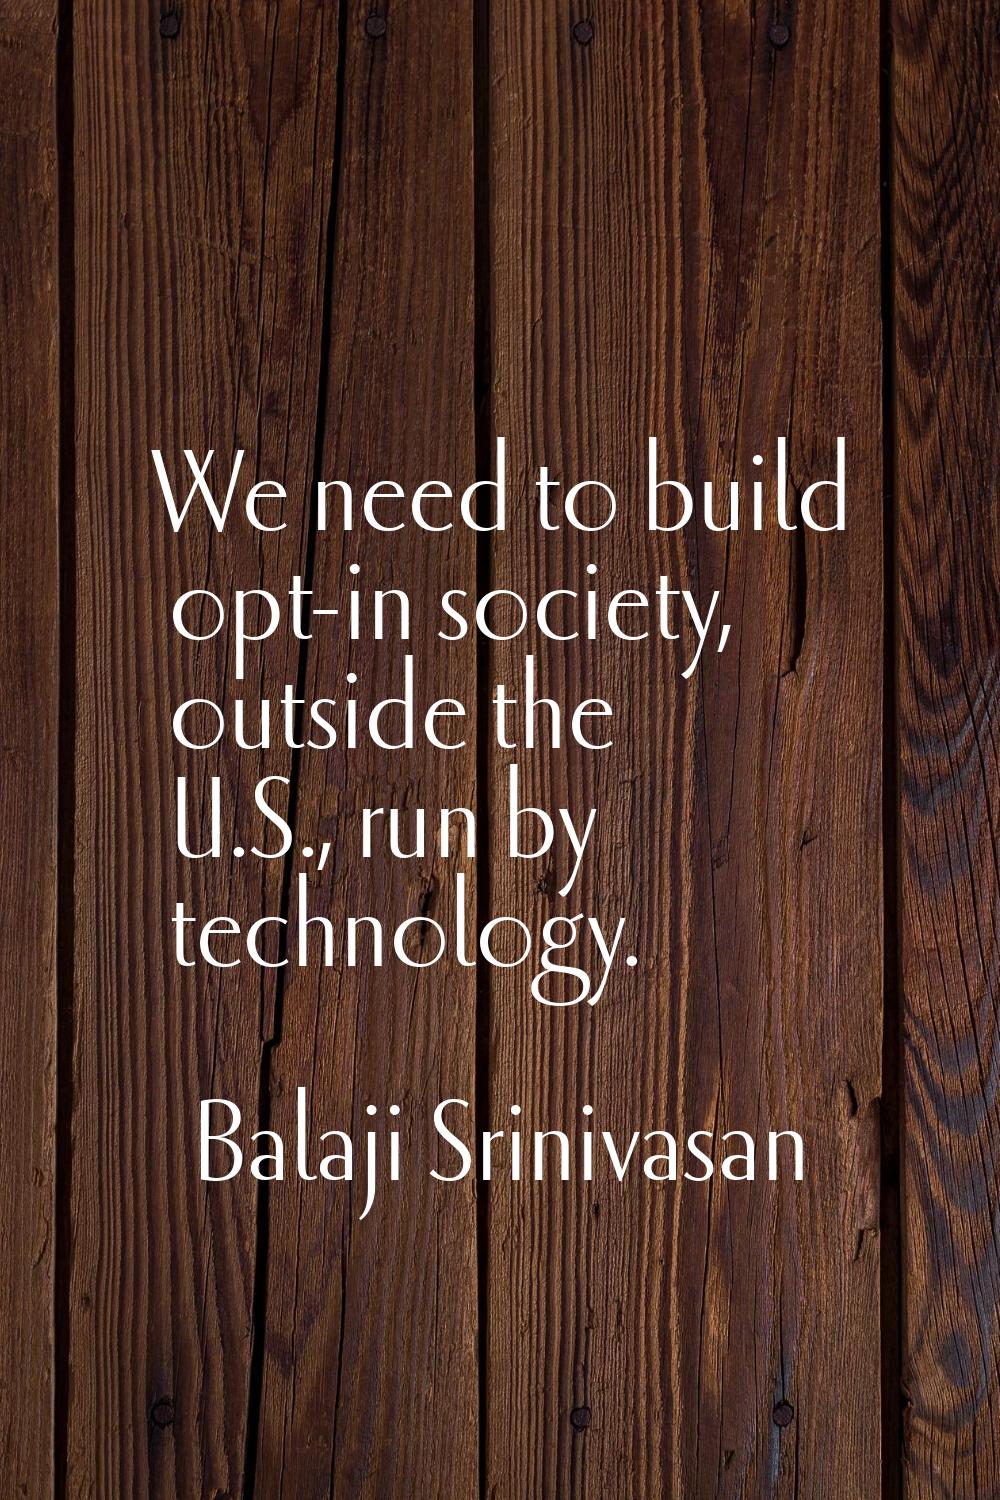 We need to build opt-in society, outside the U.S., run by technology.